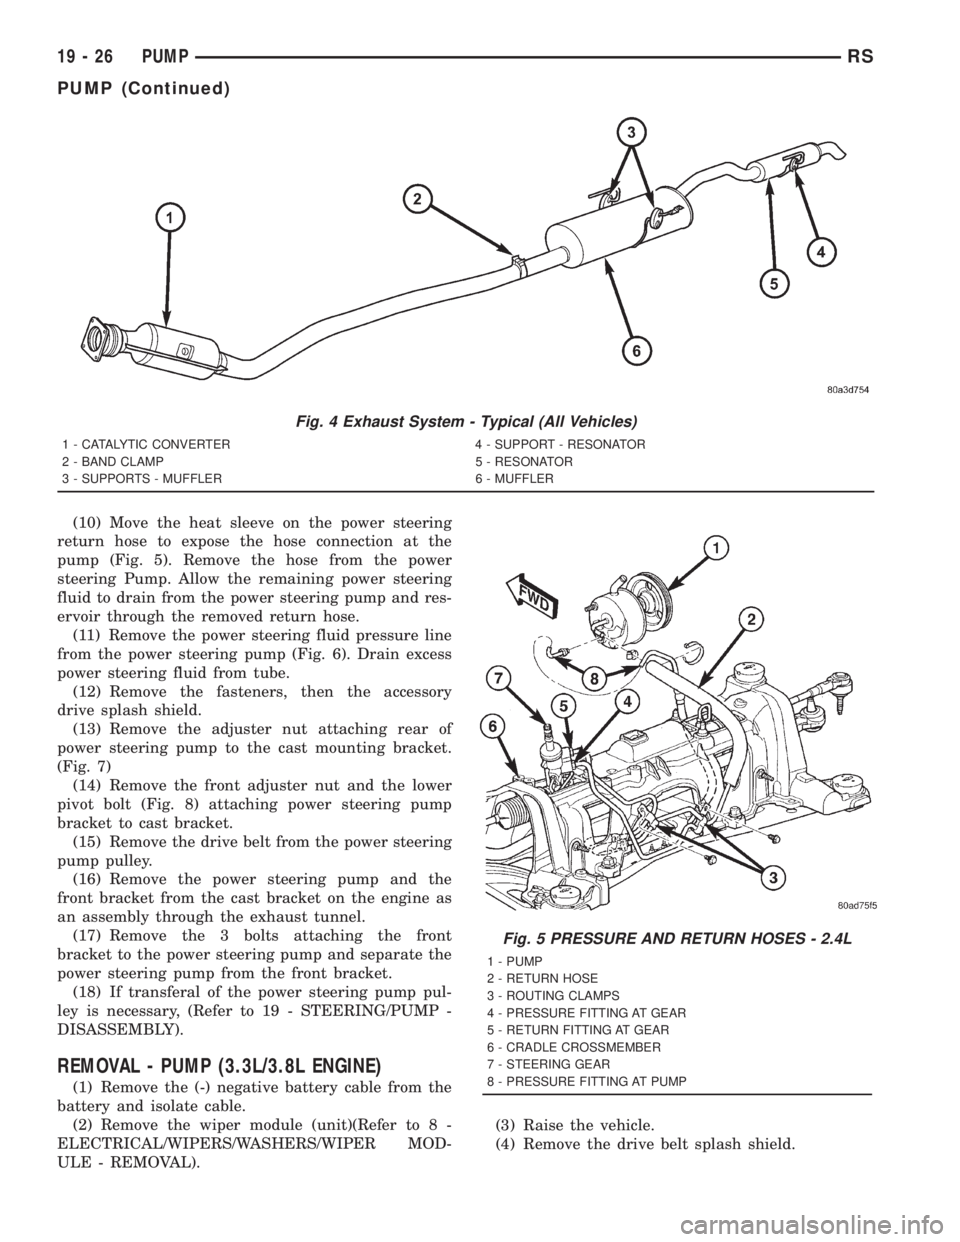 CHRYSLER VOYAGER 2001  Service Manual (10) Move the heat sleeve on the power steering
return hose to expose the hose connection at the
pump (Fig. 5). Remove the hose from the power
steering Pump. Allow the remaining power steering
fluid t